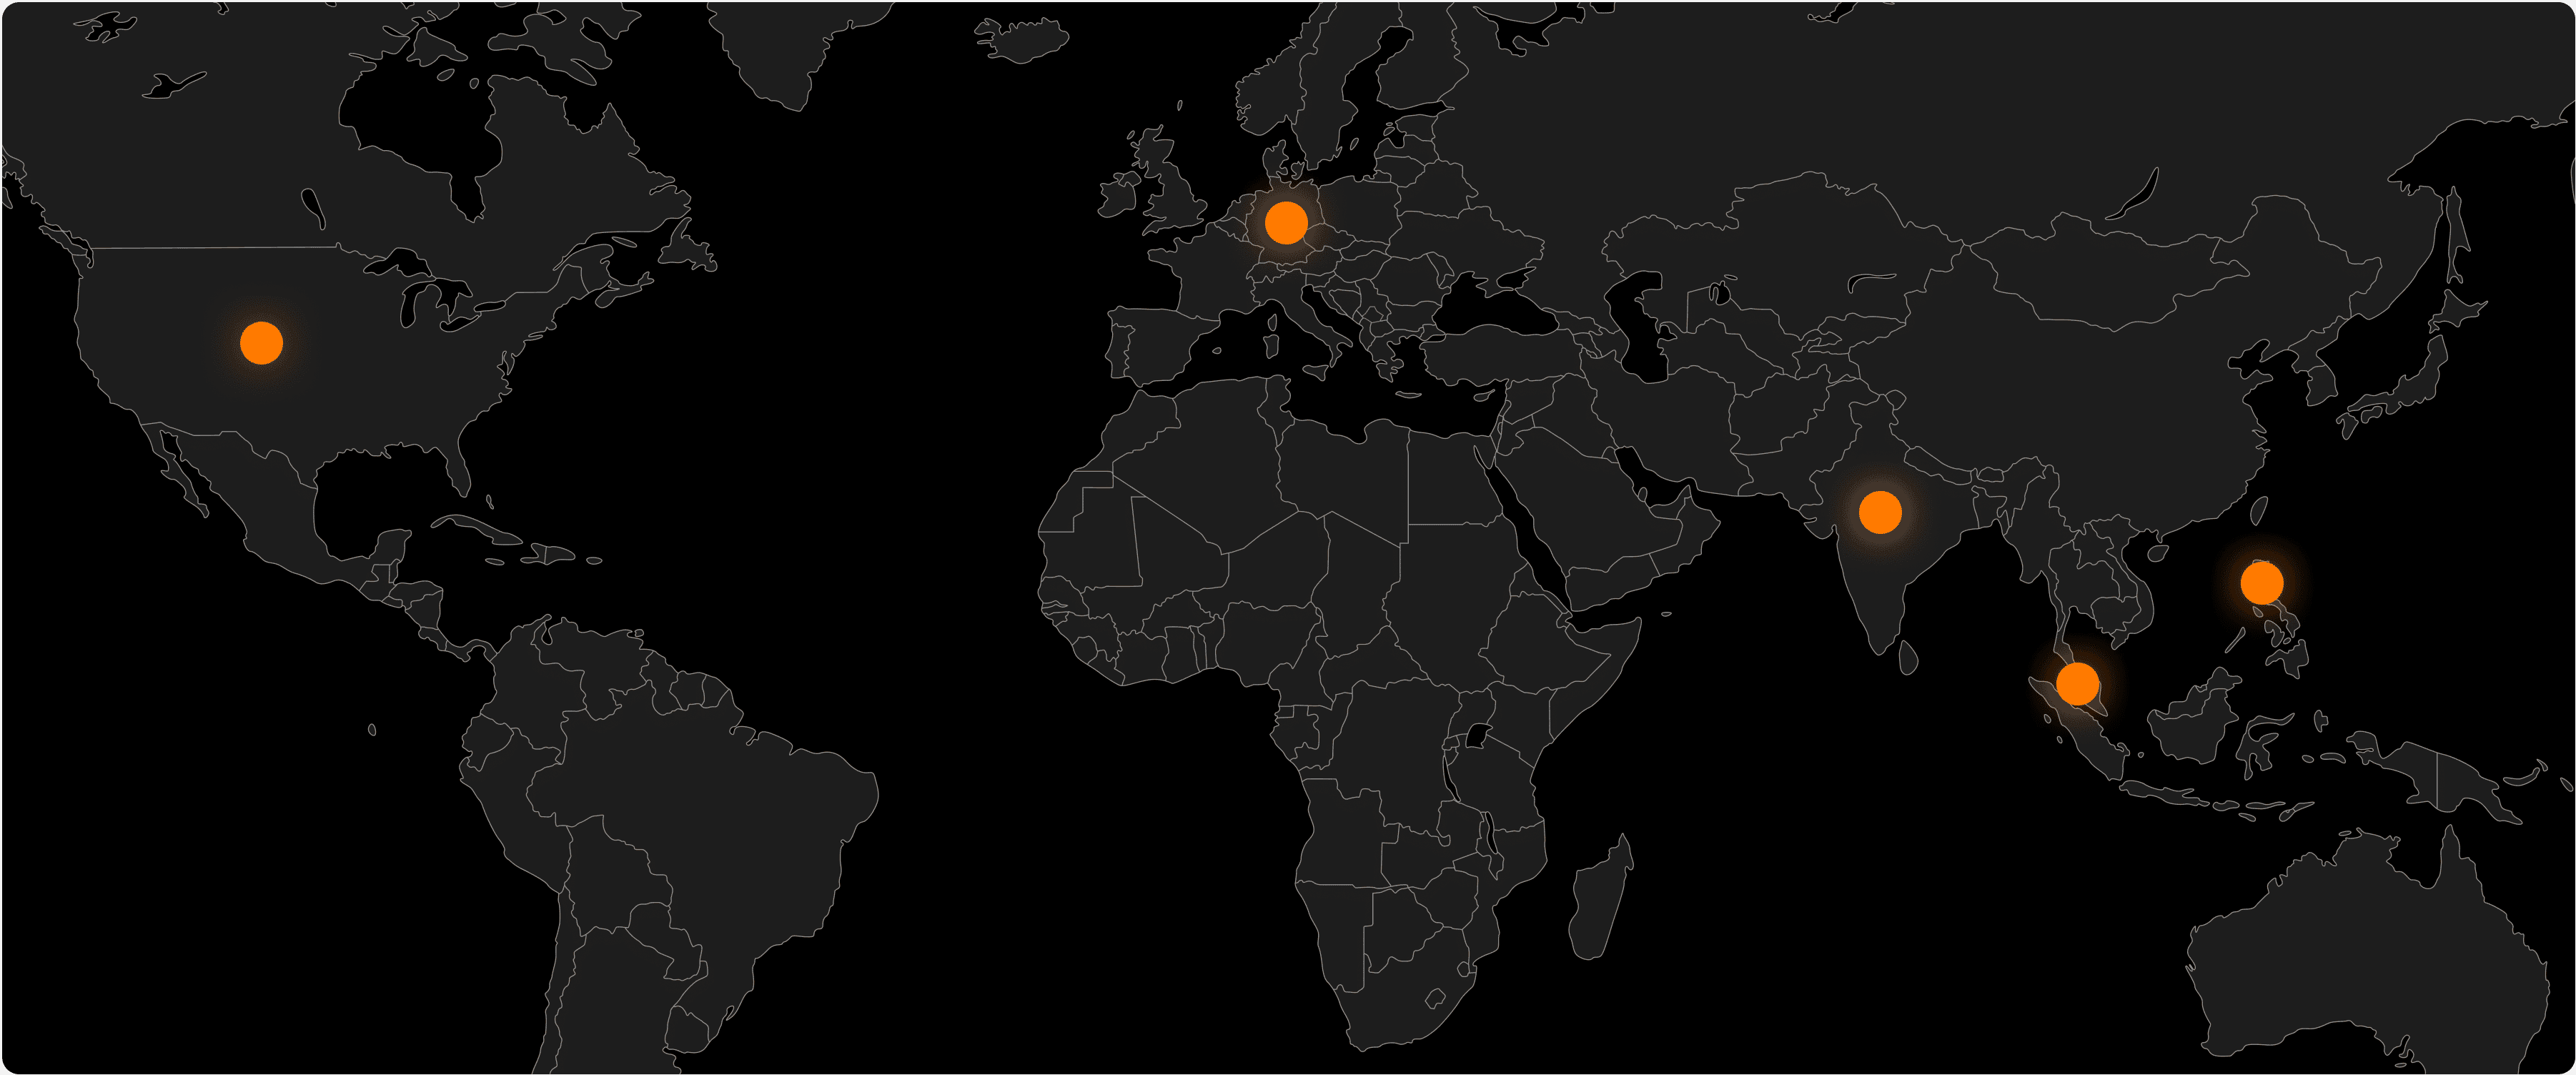 Global map displaying the distribution of Samespace's data centers, represented by bright orange circles against a dark background, symbolizing the company's international infrastructure footprint.